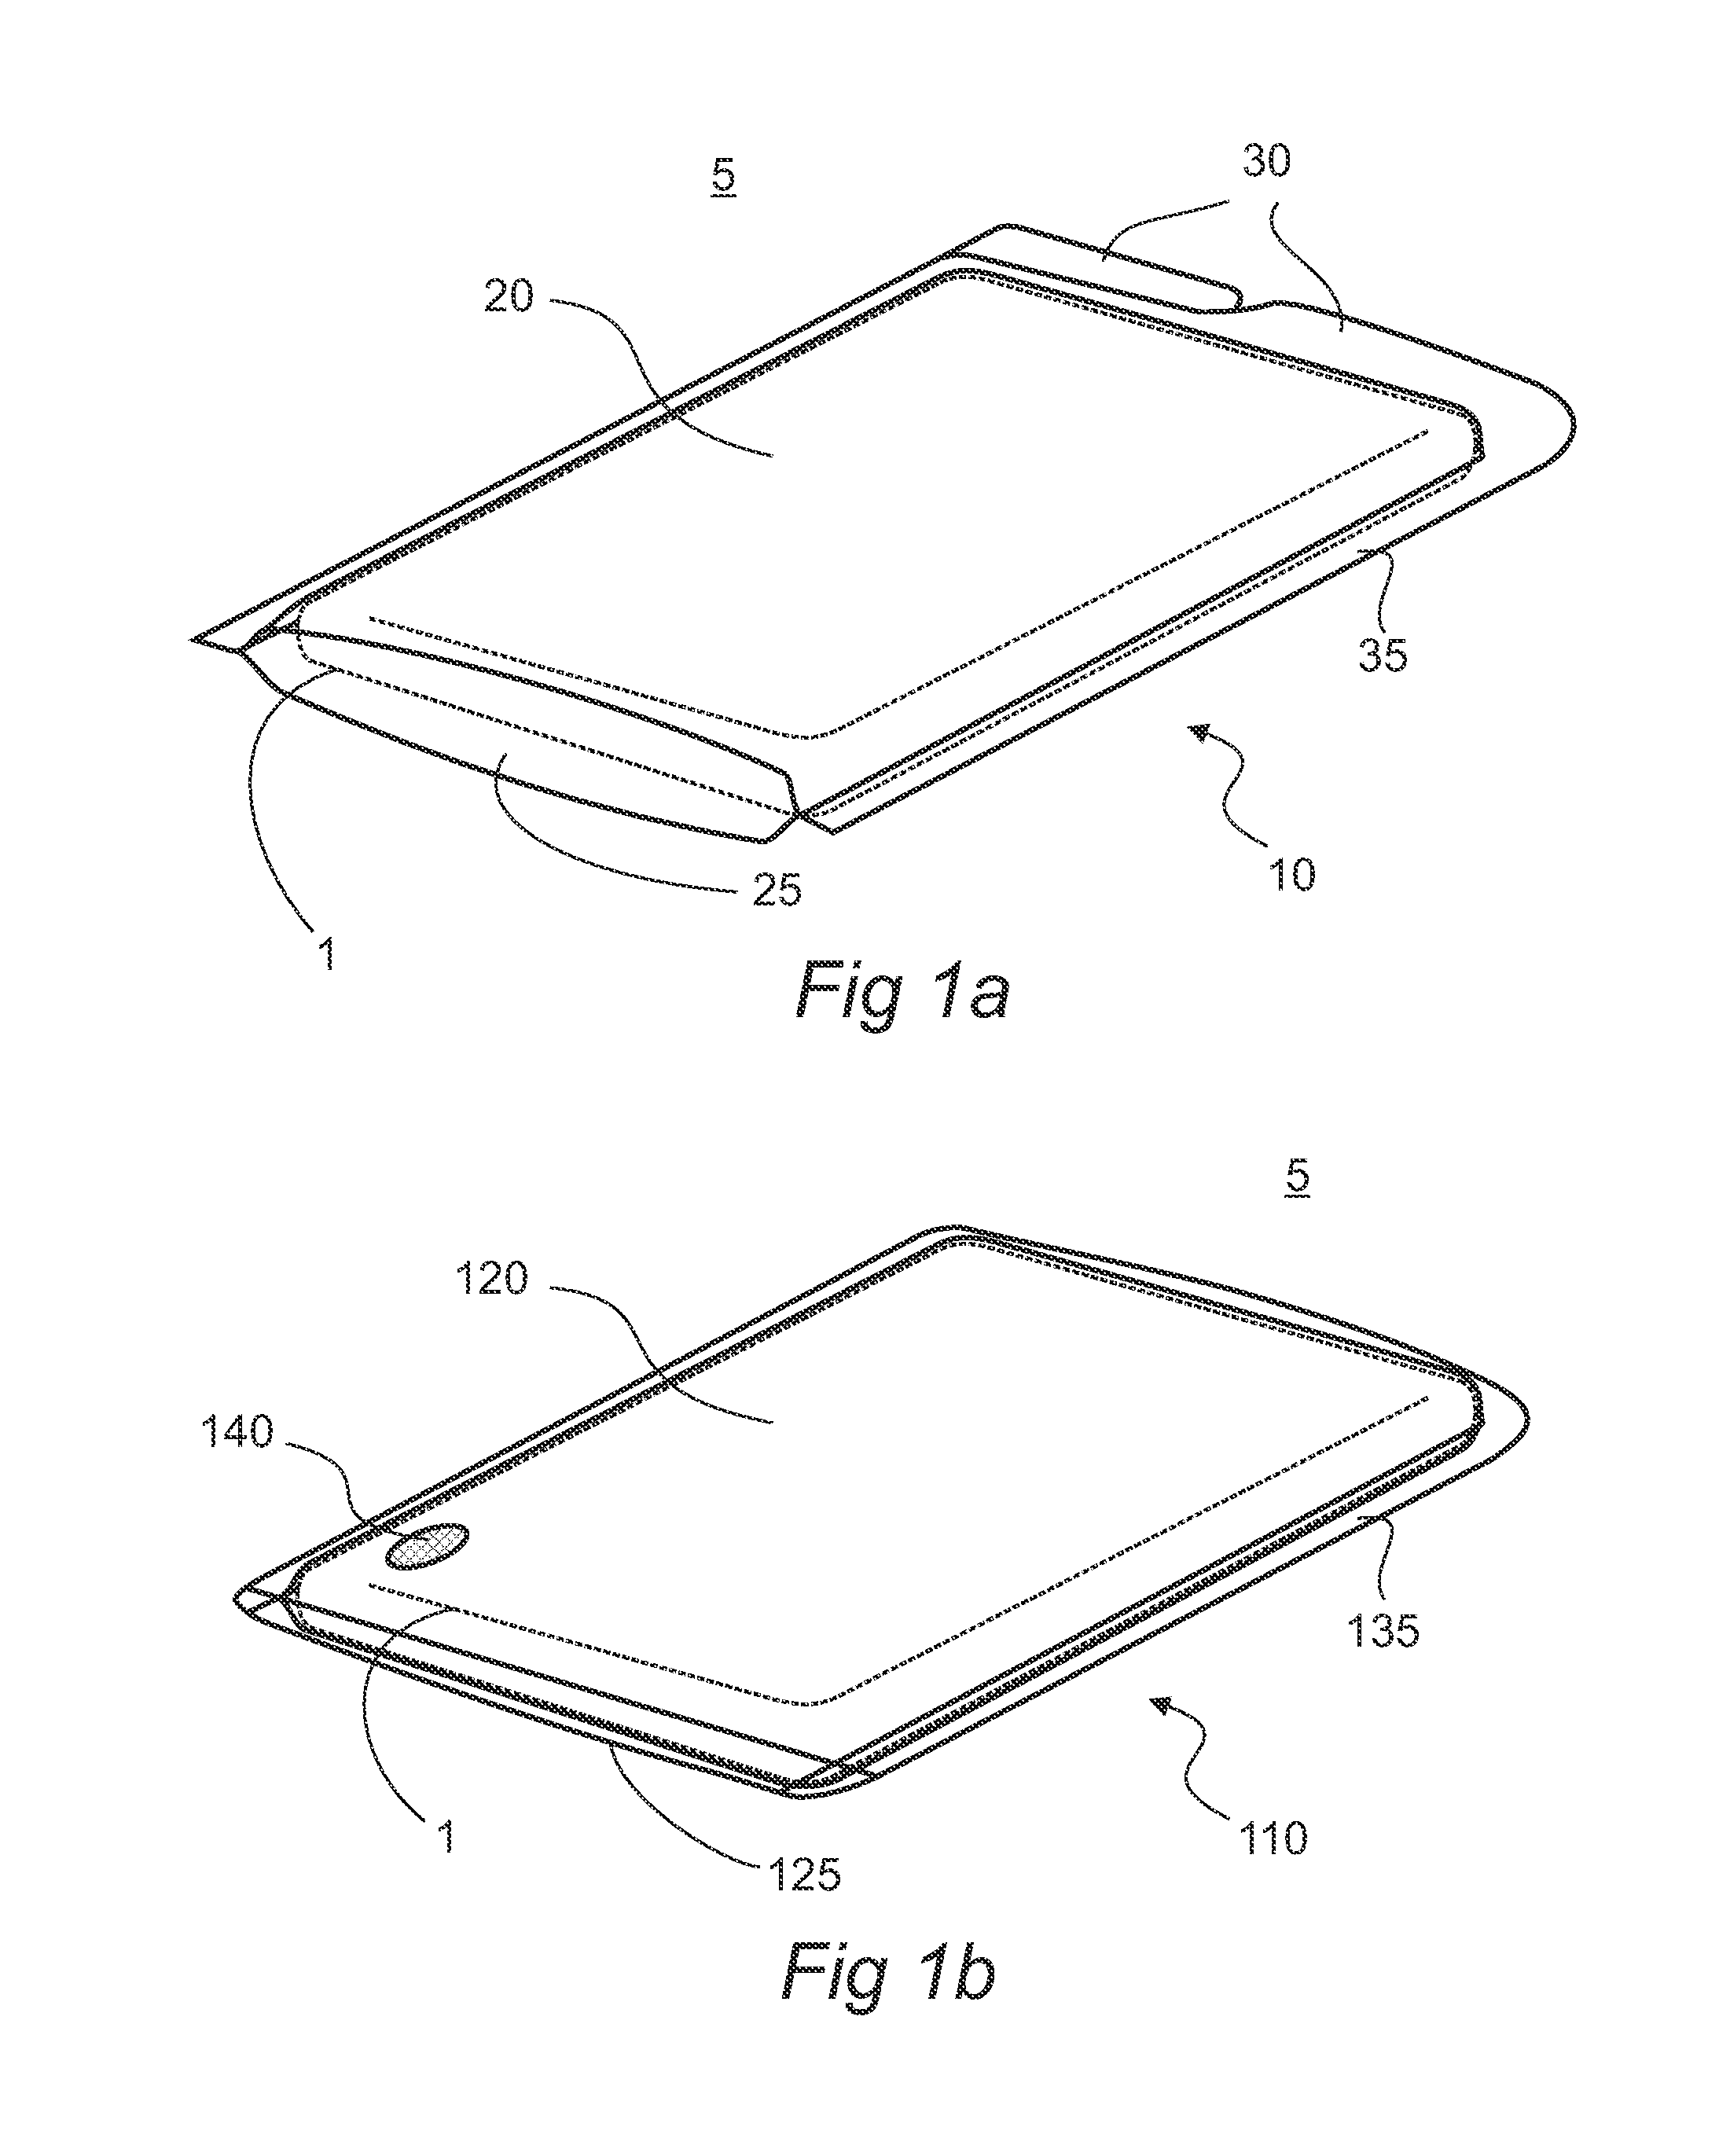 Isolation system for a mobile computing device